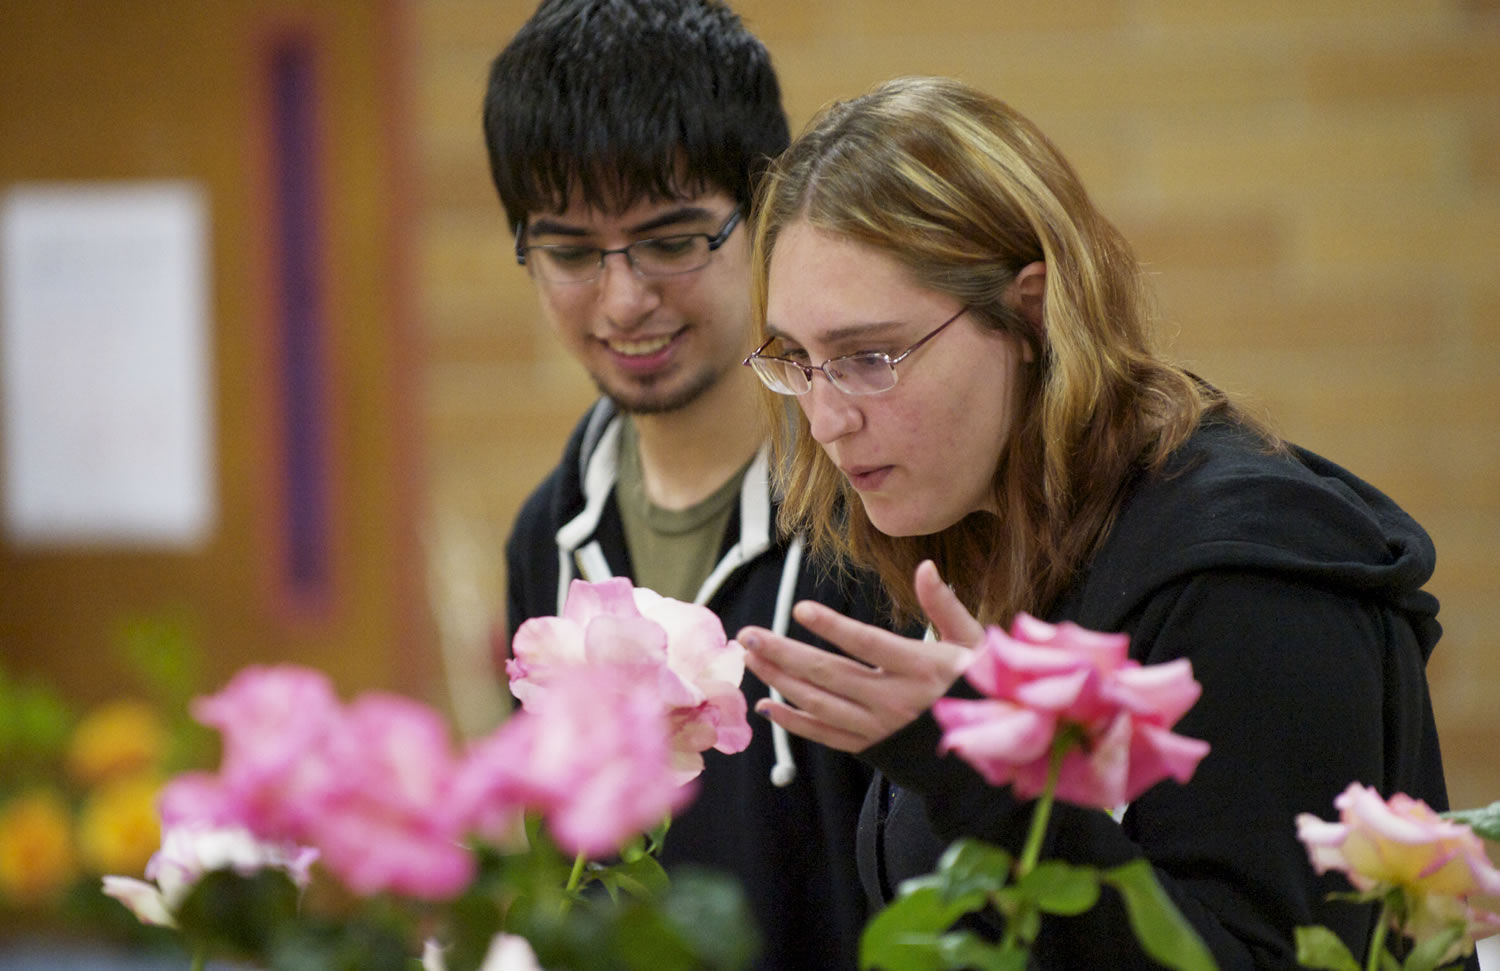 Geoffrey Fuerte-Stone, left, and Sarah Randall, both from Vancouver, enjoy the Fort Vancouver Rose Society rose show on Saturday.